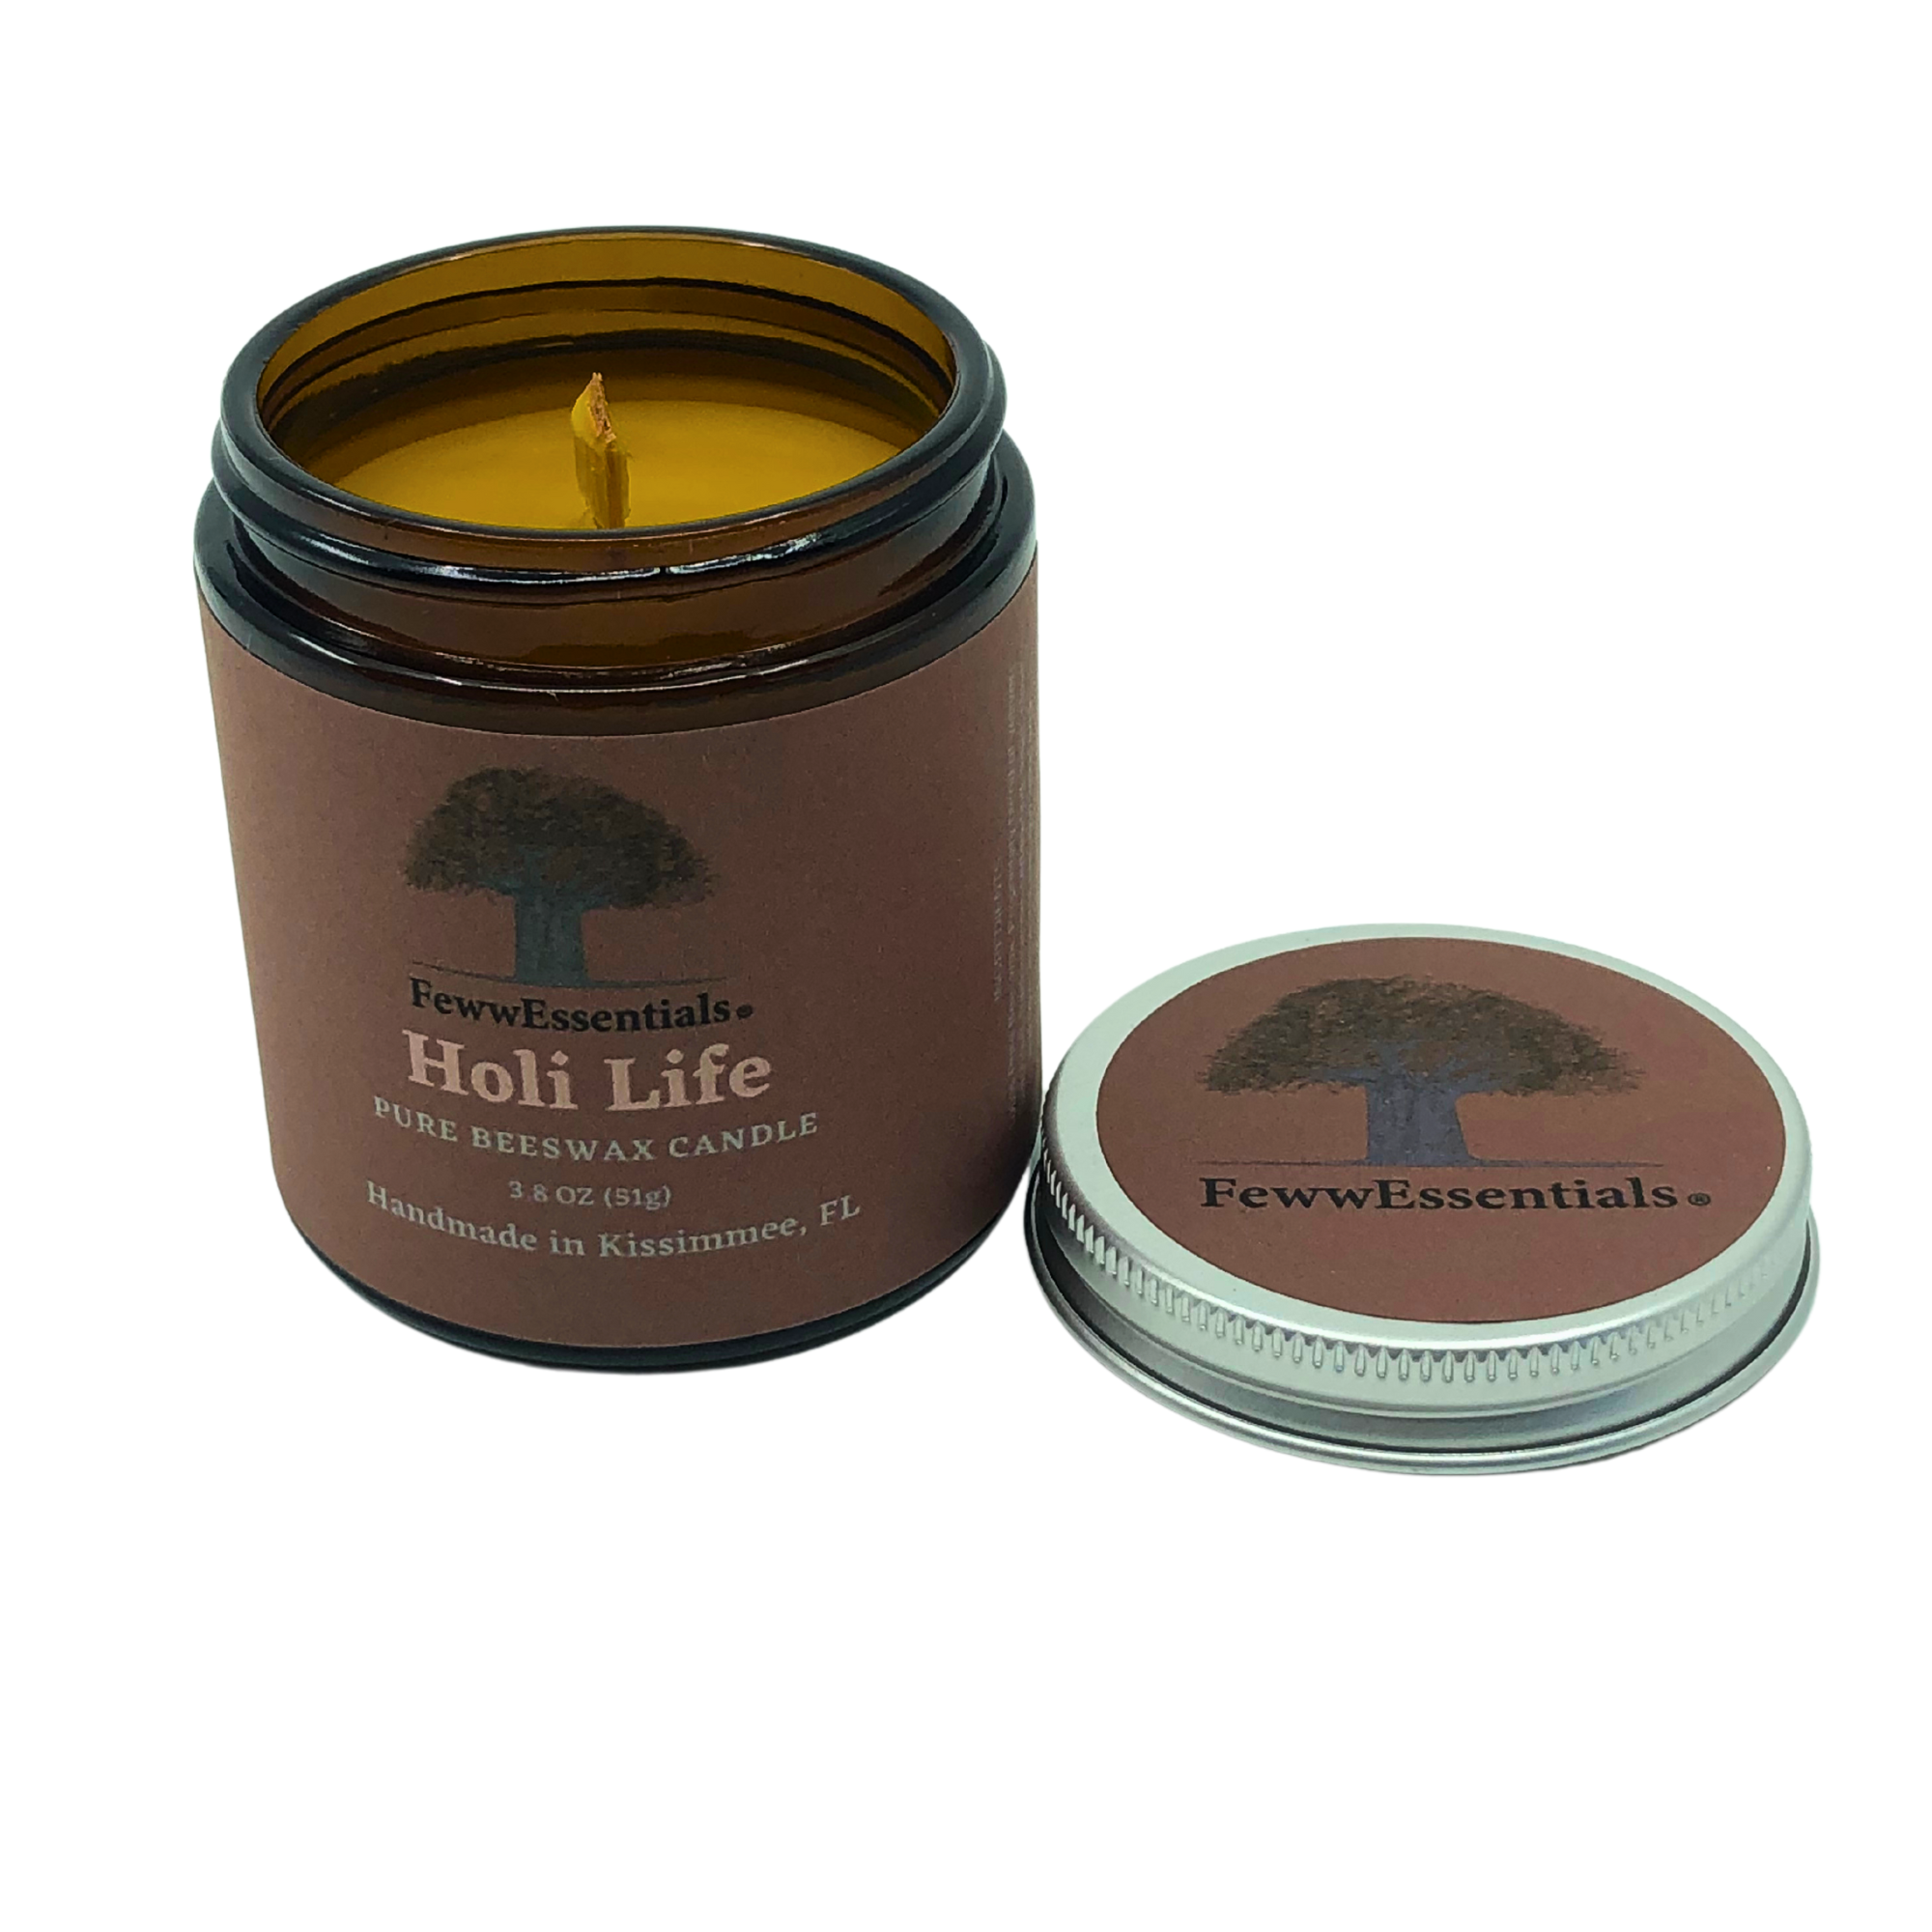 FewwEssentials® Holi Life Pure Beeswax Candle with Essential Oils